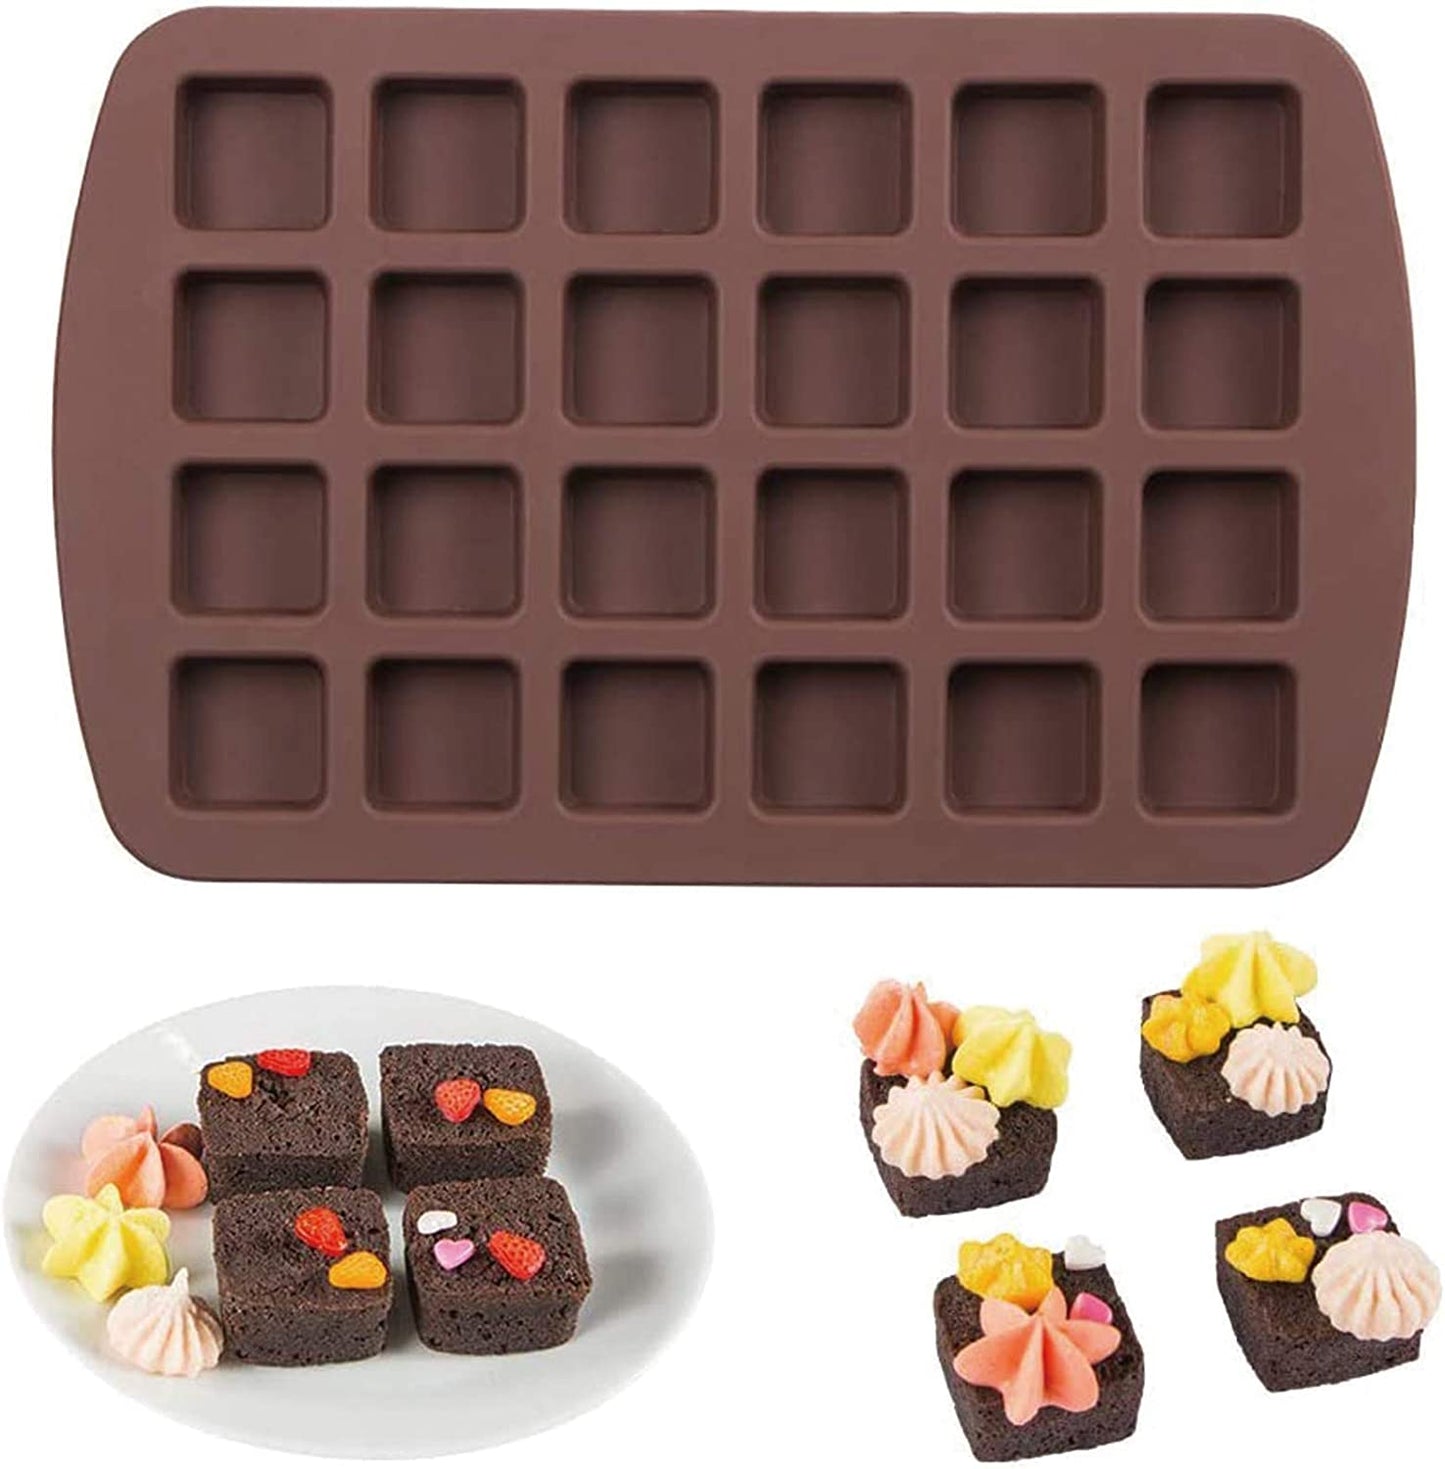 Webake Brownie Cake Pan, 6-Cavity Non-Stick Square Muffin Pan 1.6 Inch Deep  Brownie Mold Small Cake Pan Bakeware for Oven Baking (Champagne Gold)